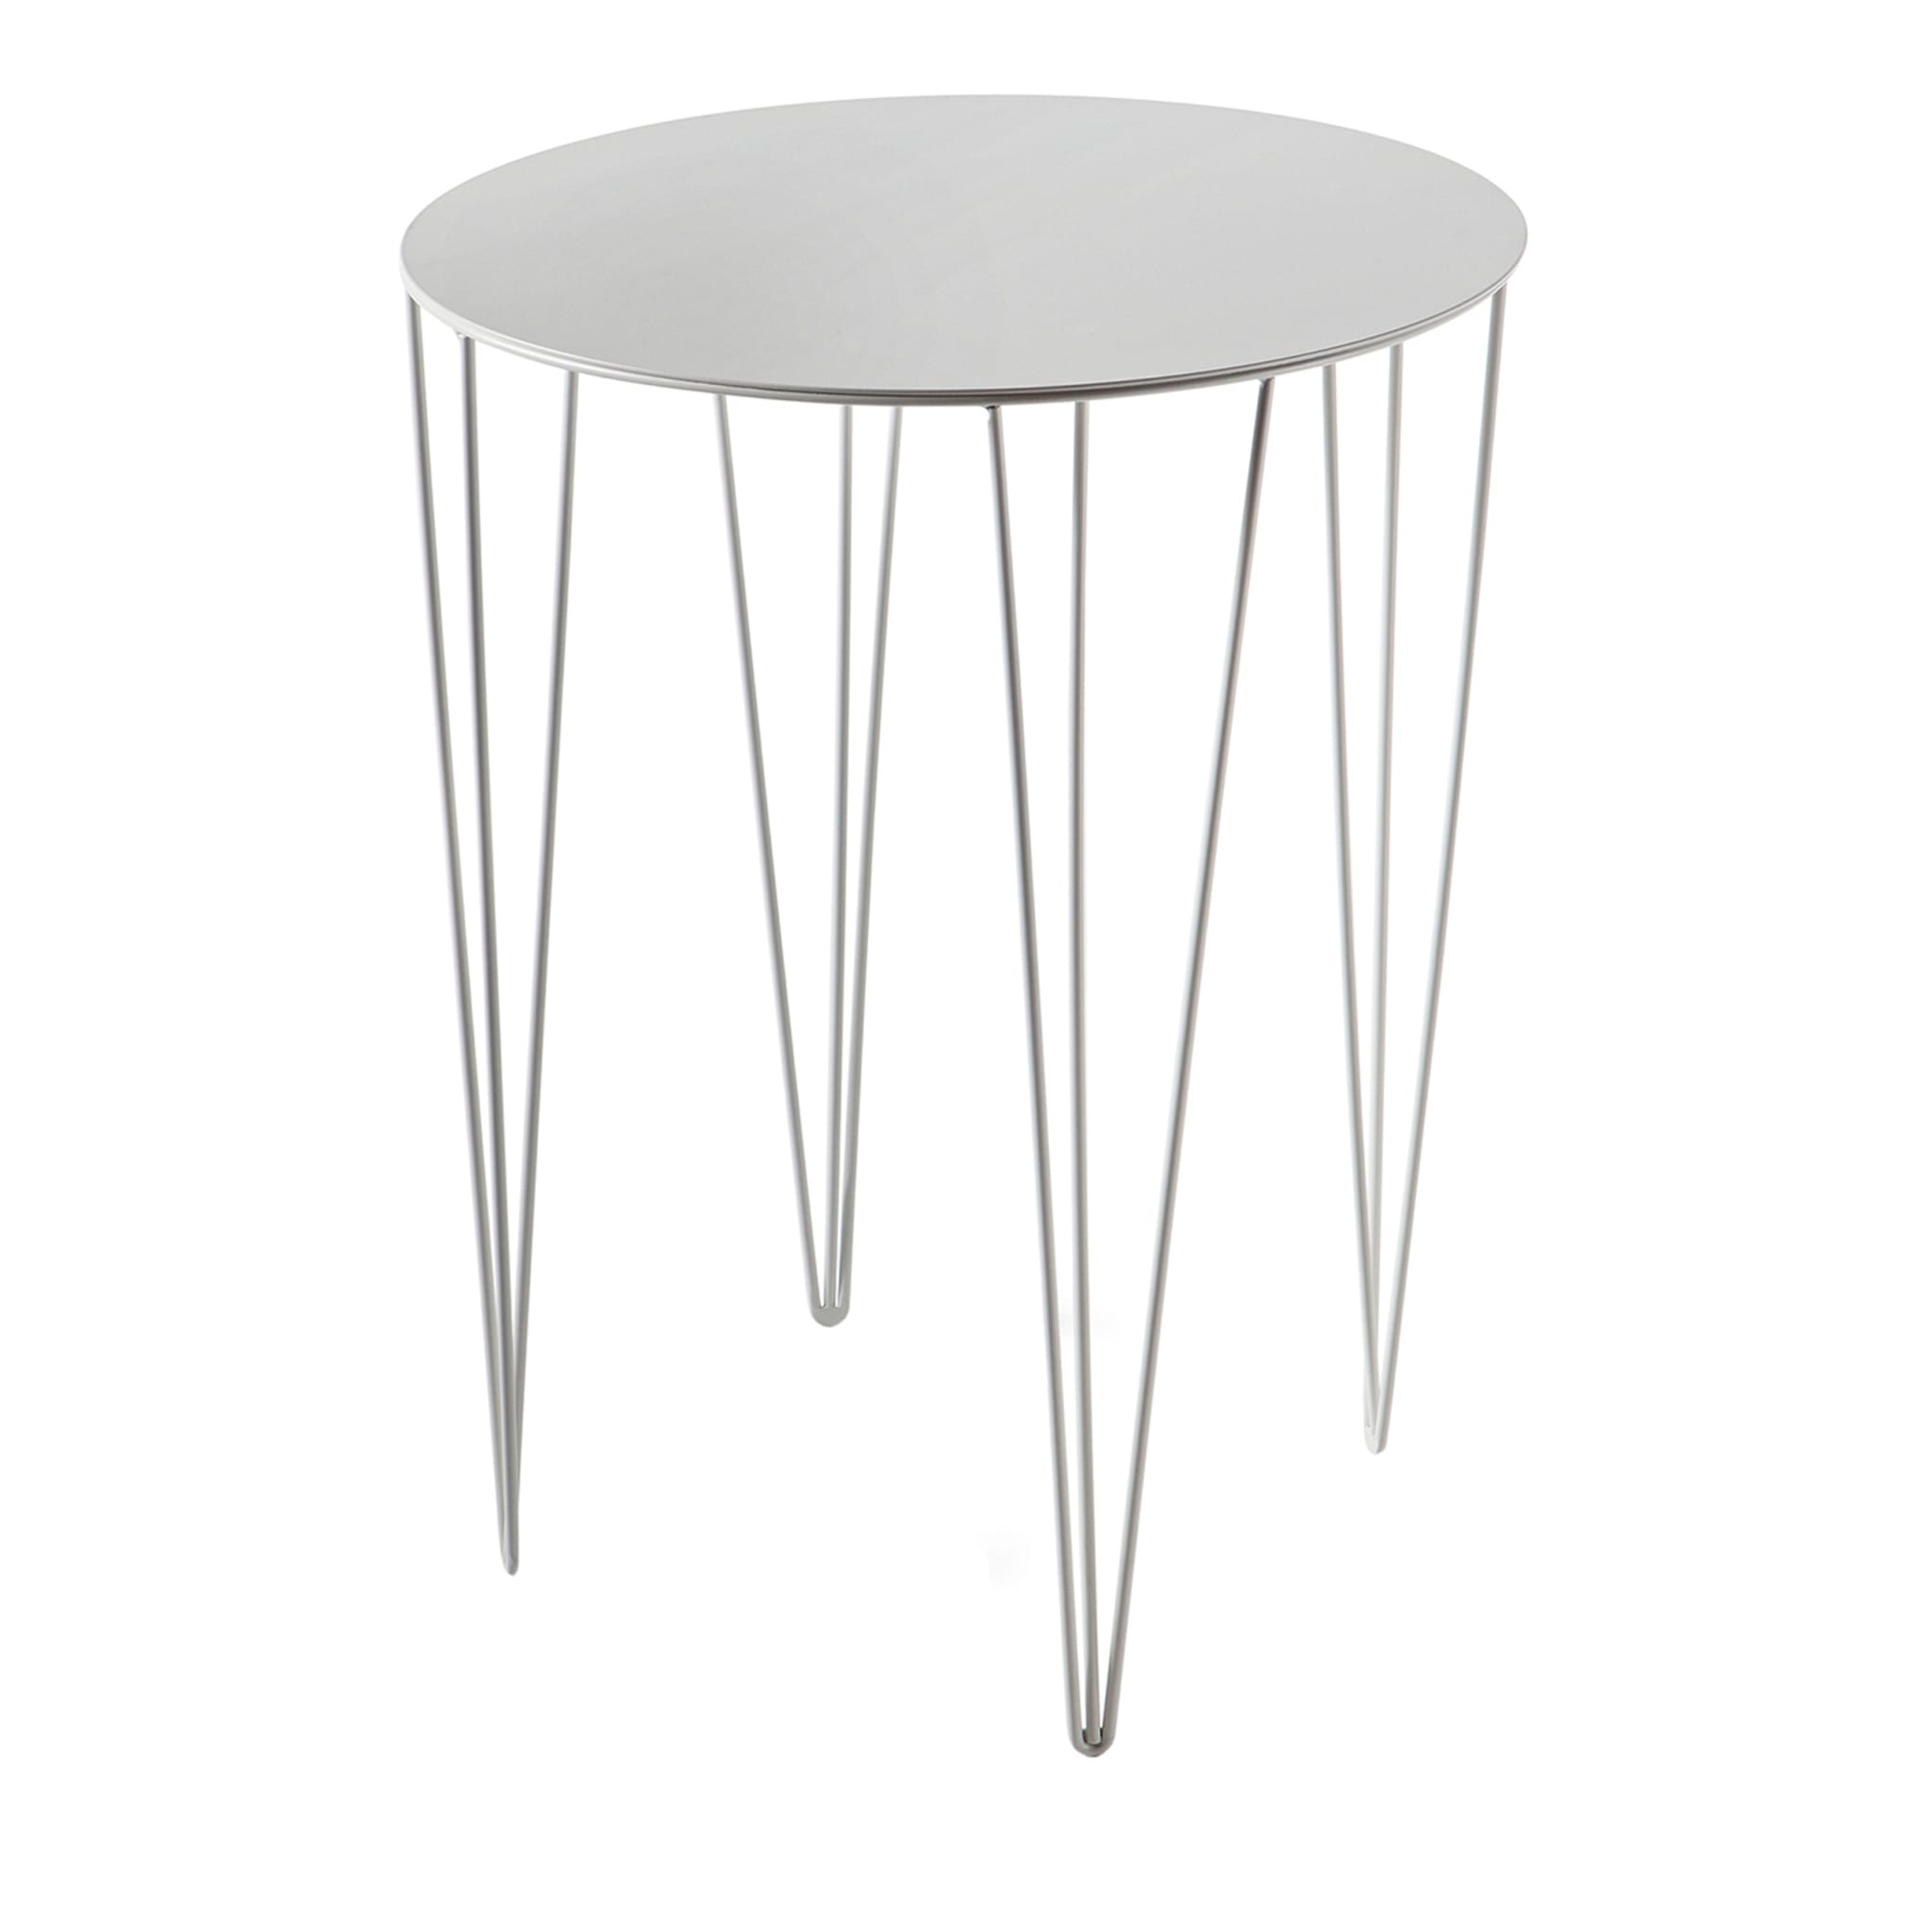 Chele White Round Side Table #1 - Main view